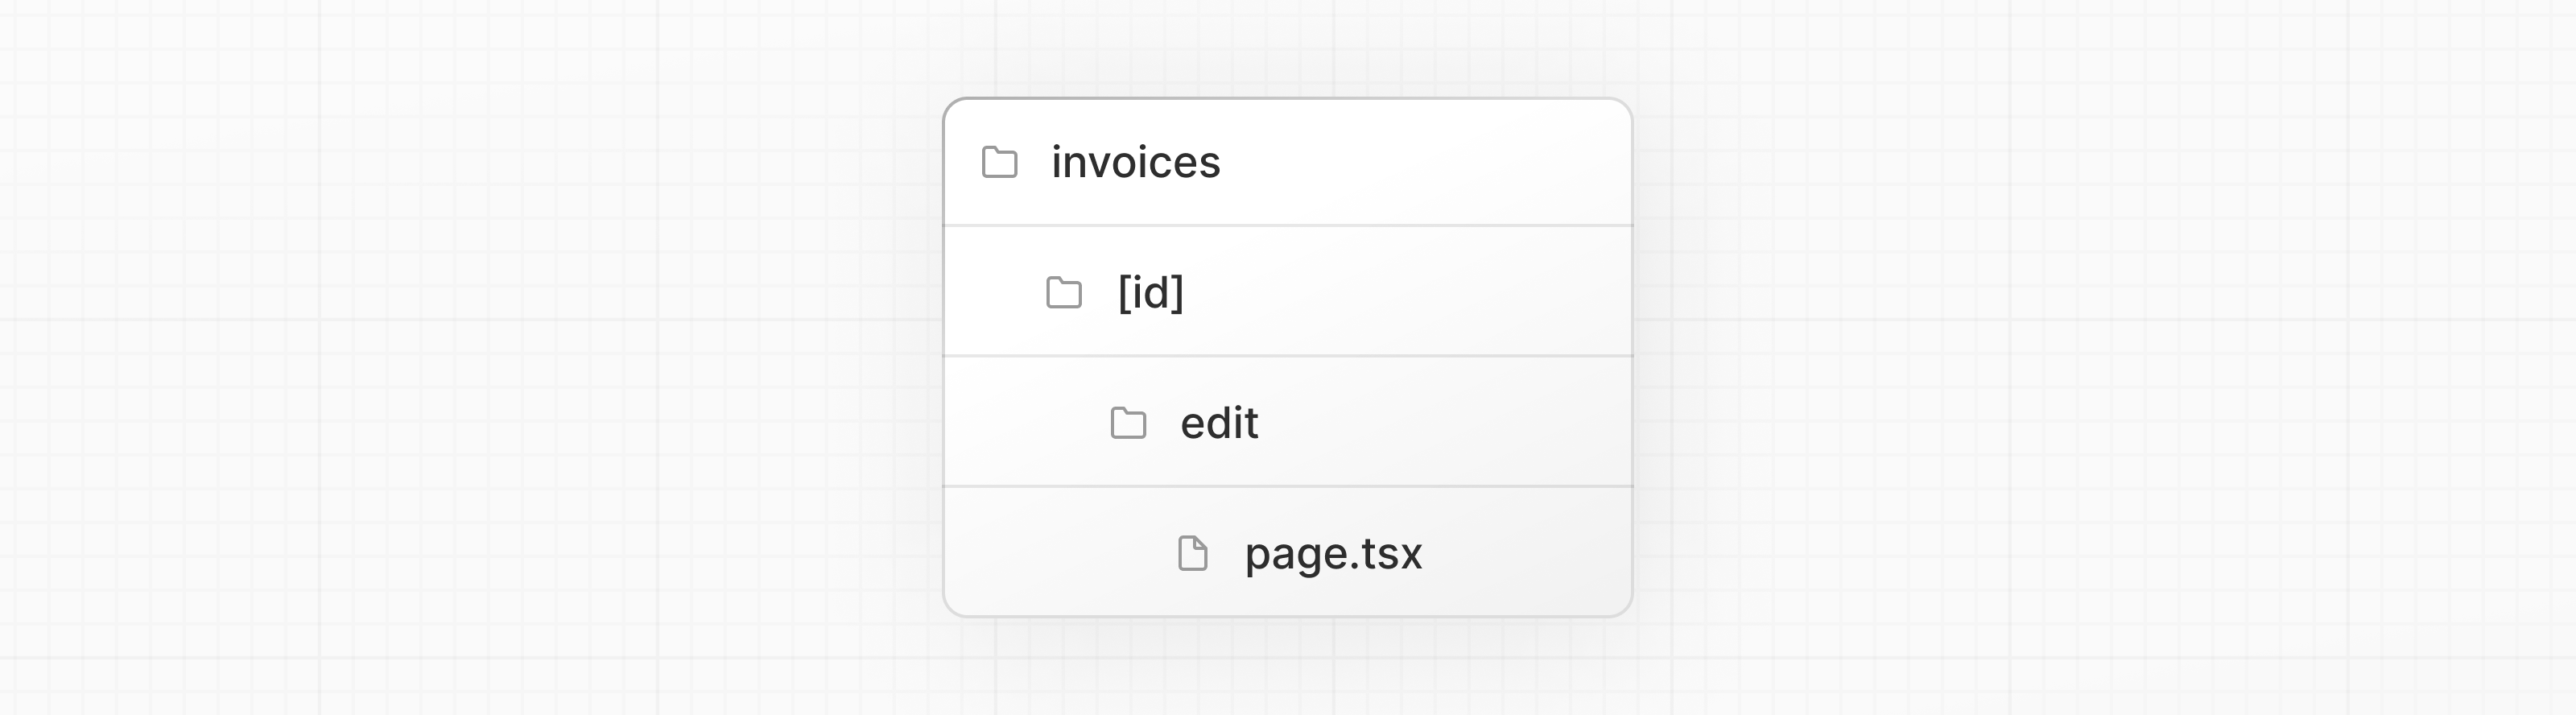 Invoices folder with a nested [id] folder, and an edit folder inside it